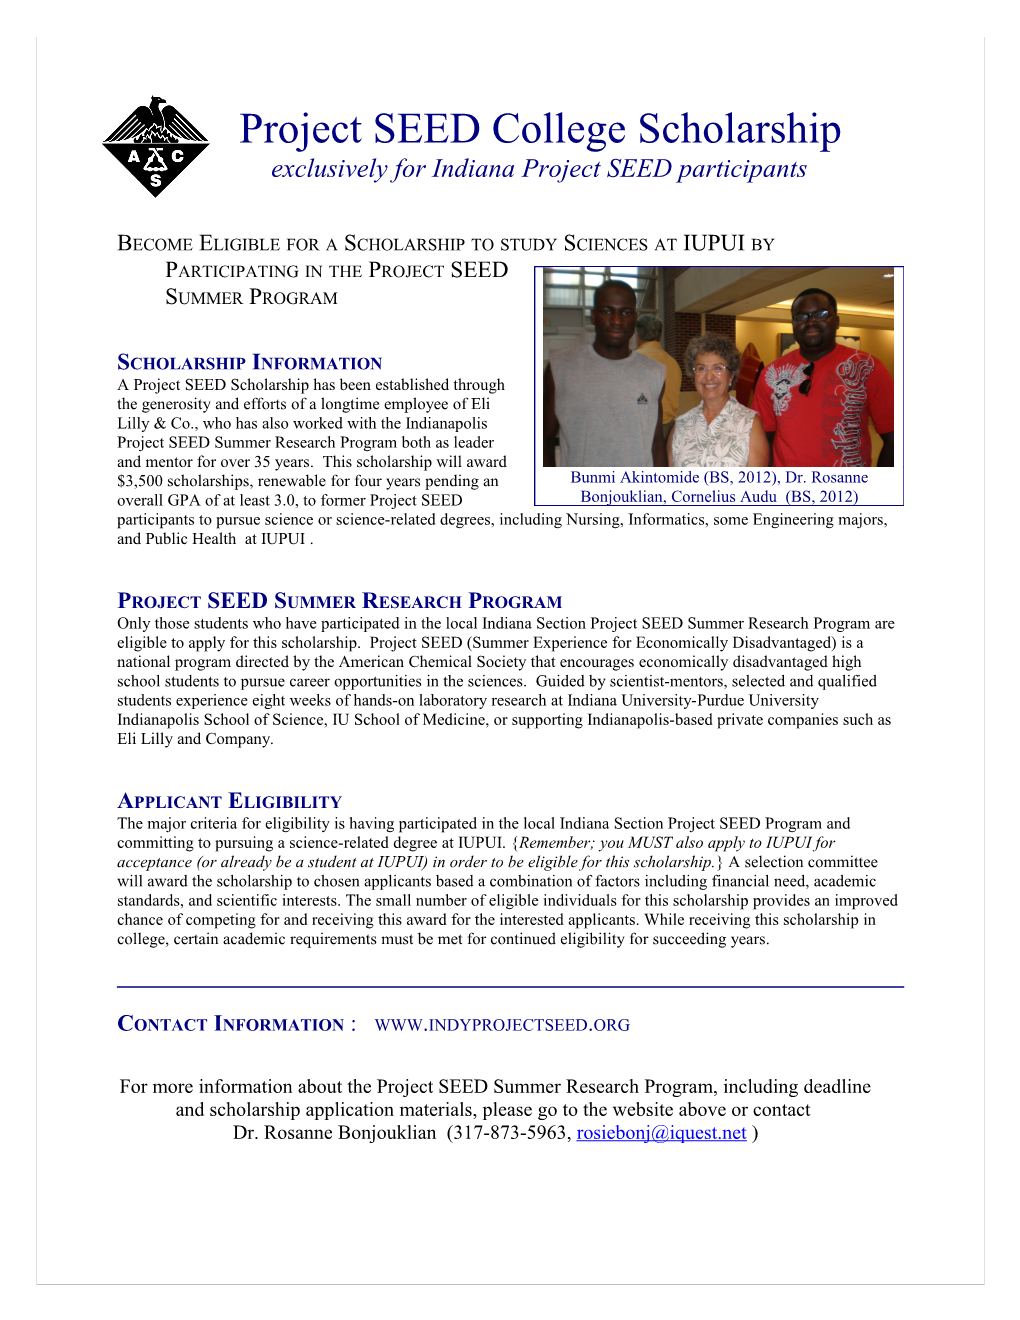 1998 Project SEED/Indiana ACS Summer Research Program